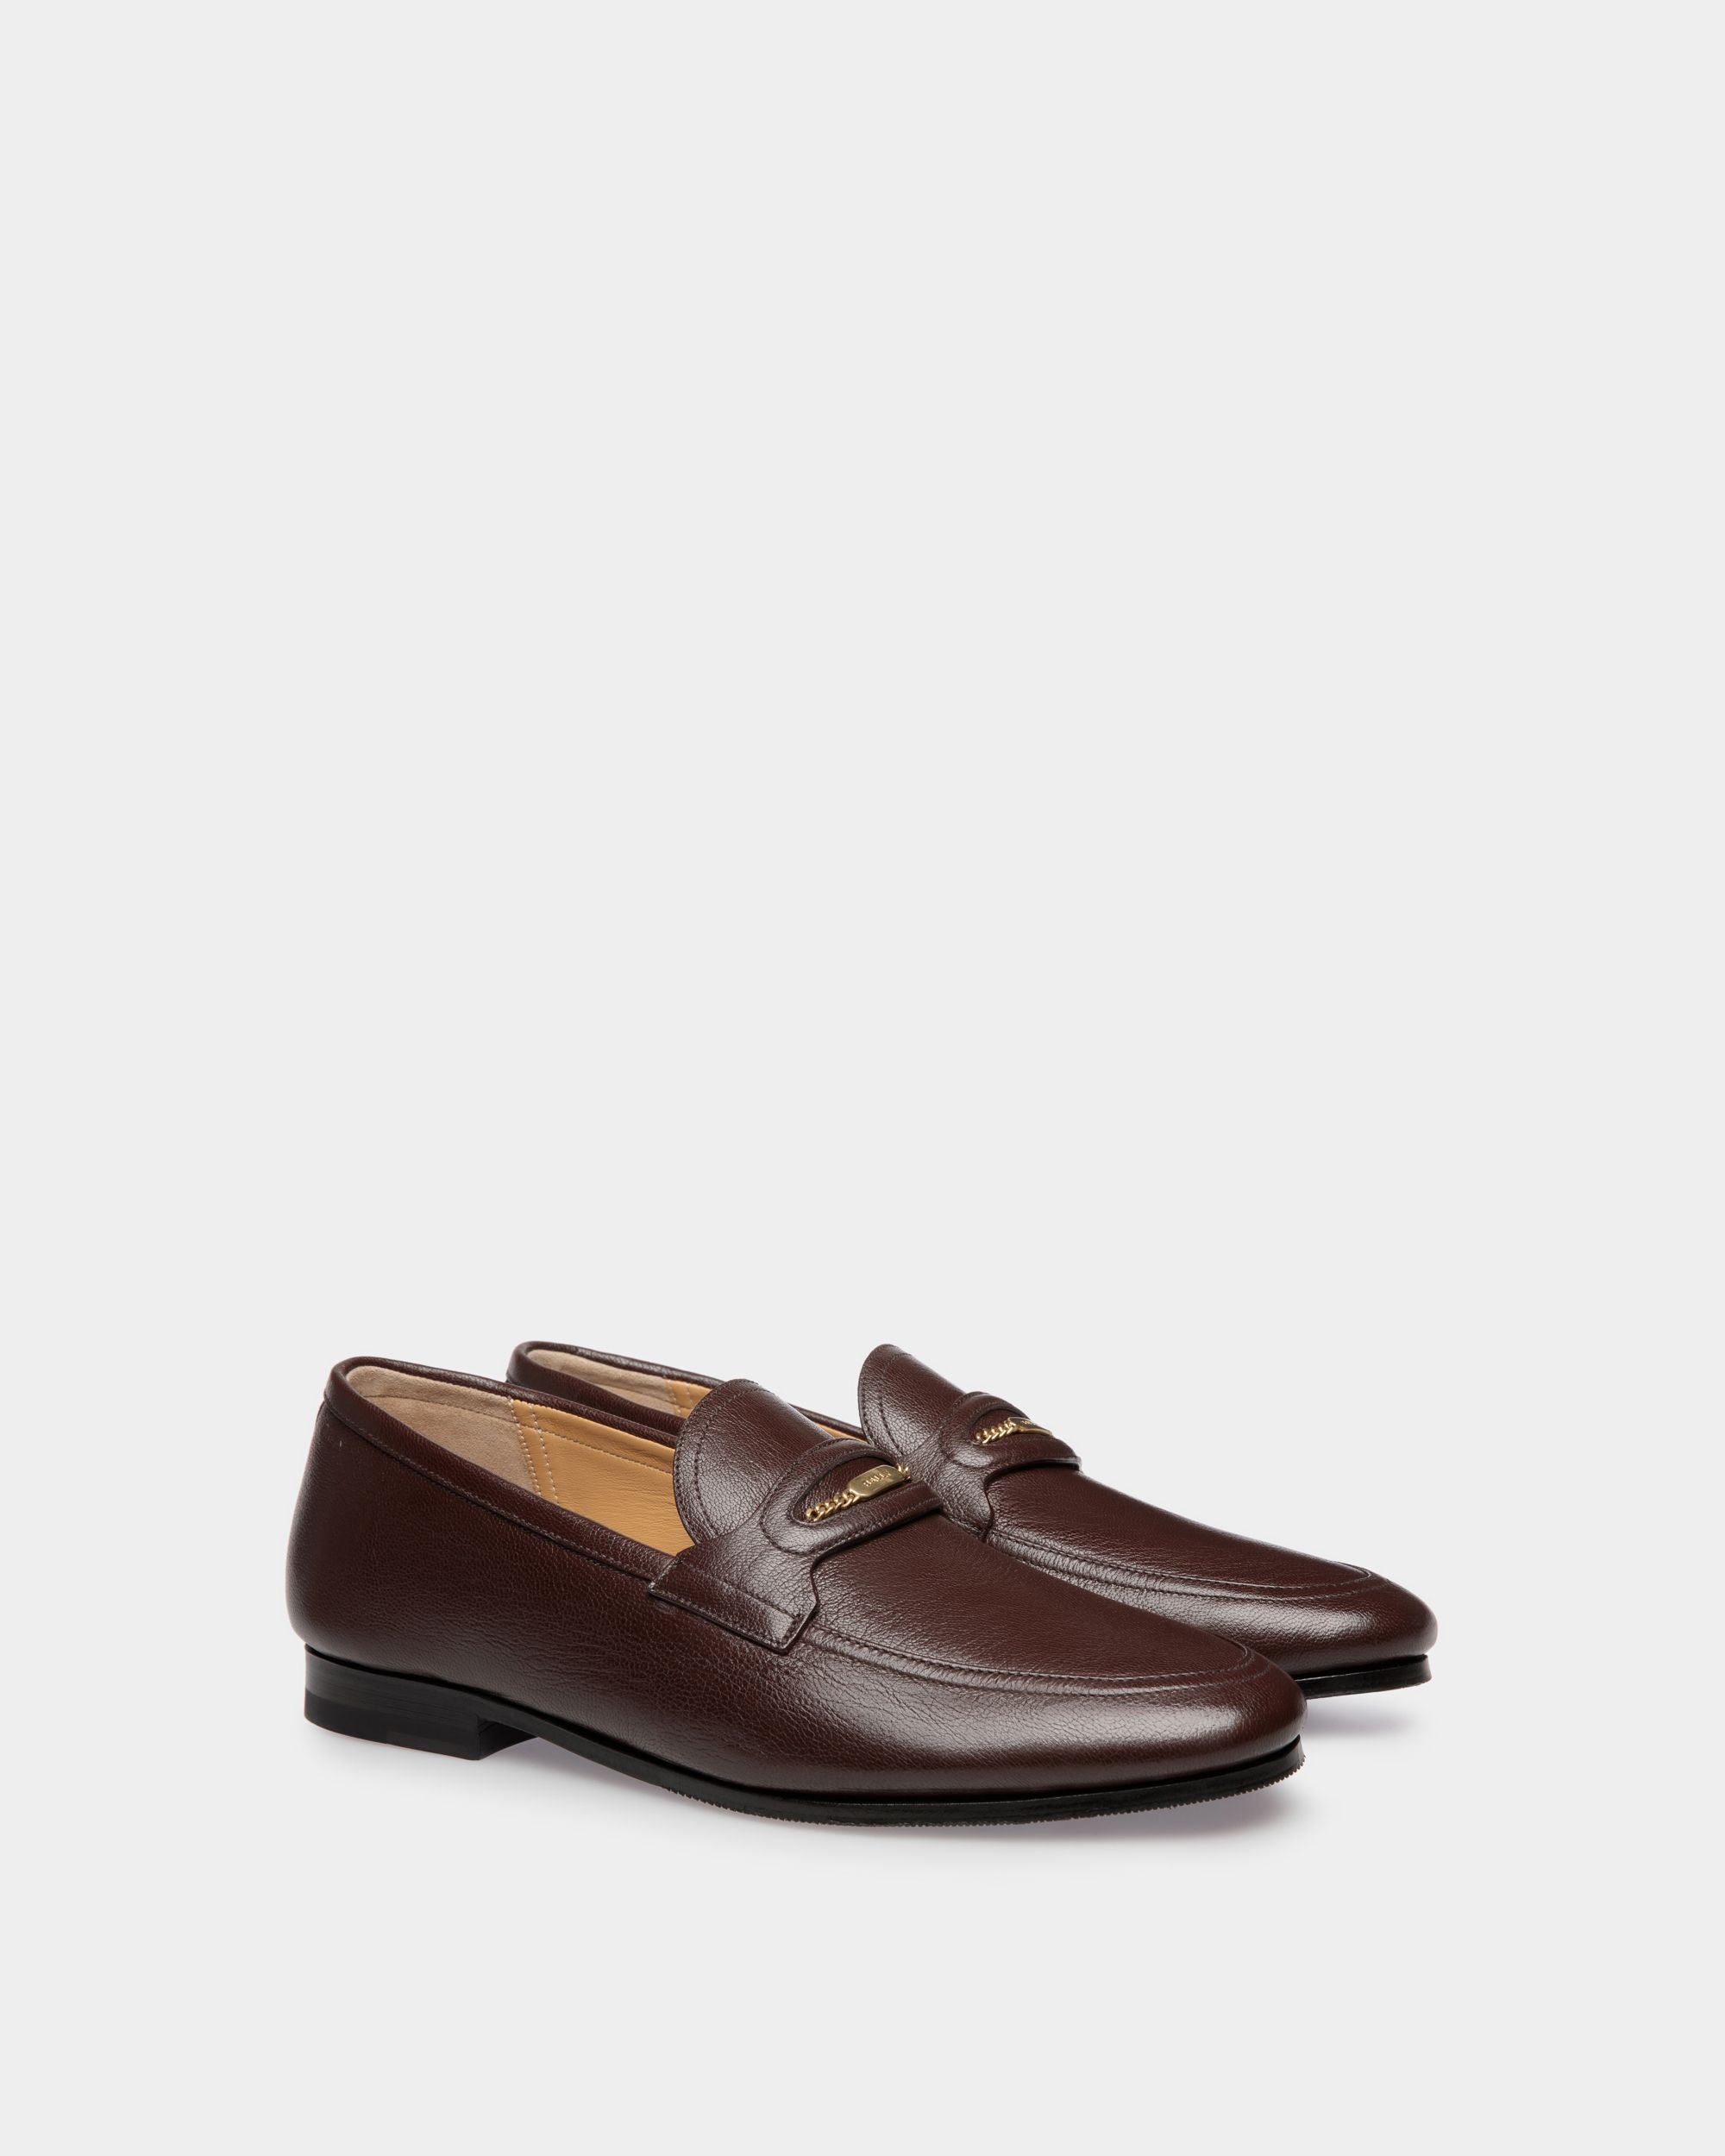 Plume | Men's Loafer in Brown Grained Leather | Bally | Still Life 3/4 Back